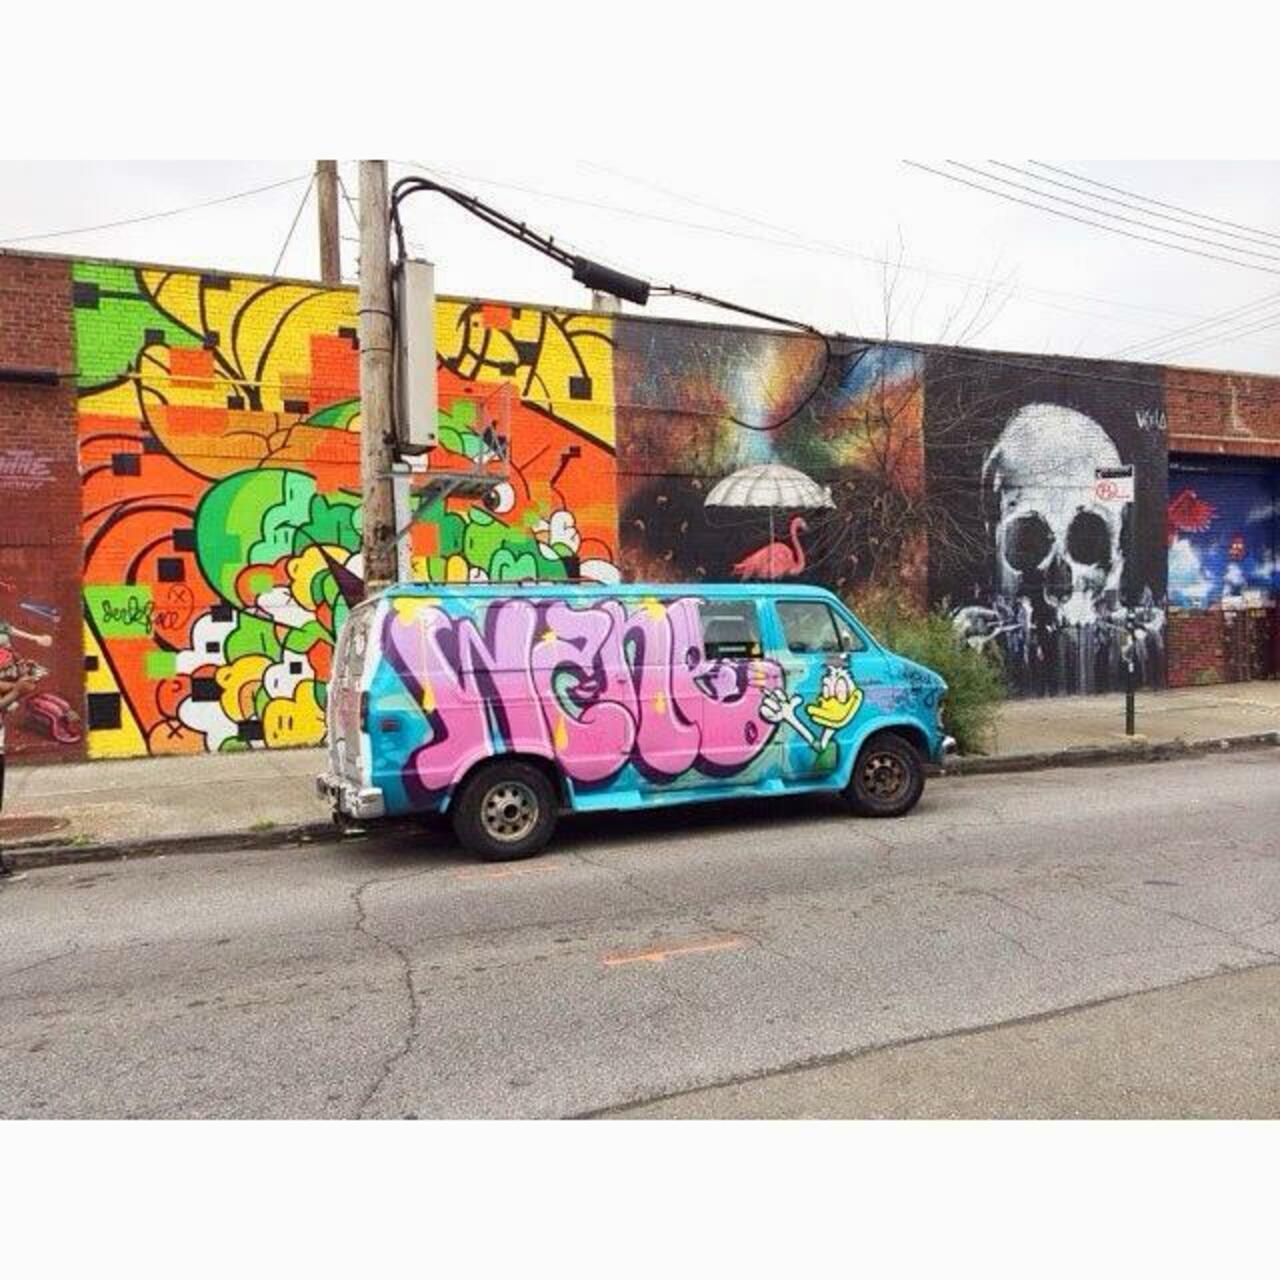 I saw this van in #brooklyn . Does anyone know of the #artist ? #streetart #graffiti http://t.co/AOziux3BYg